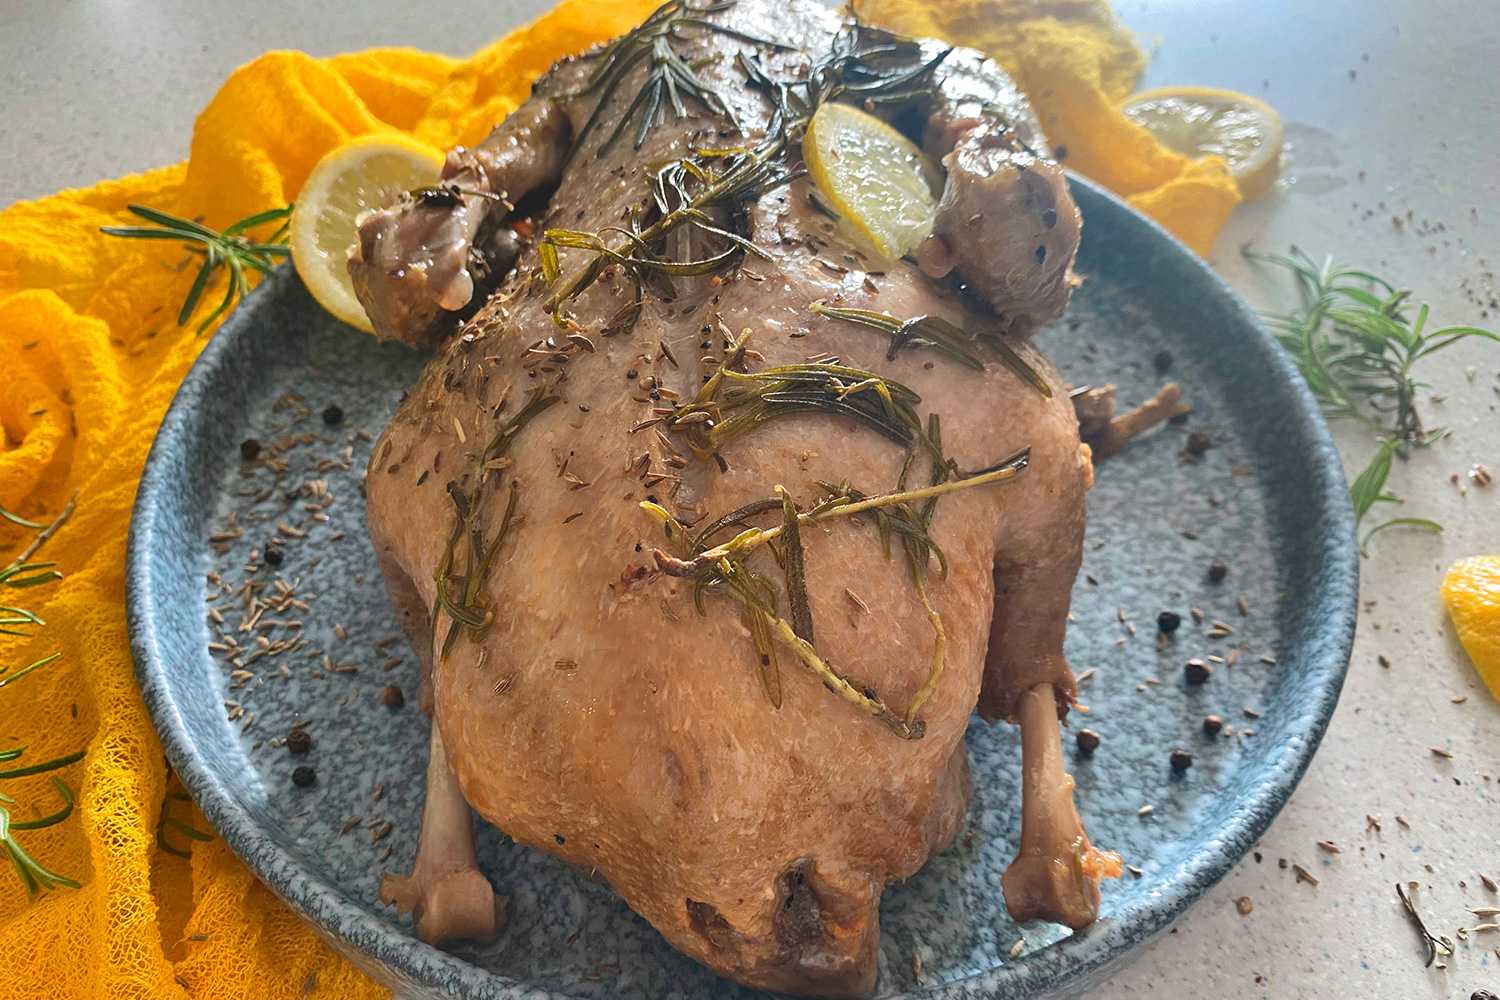 Whole duck roasted with rosemary, spices and lemon slices on top in blue plate